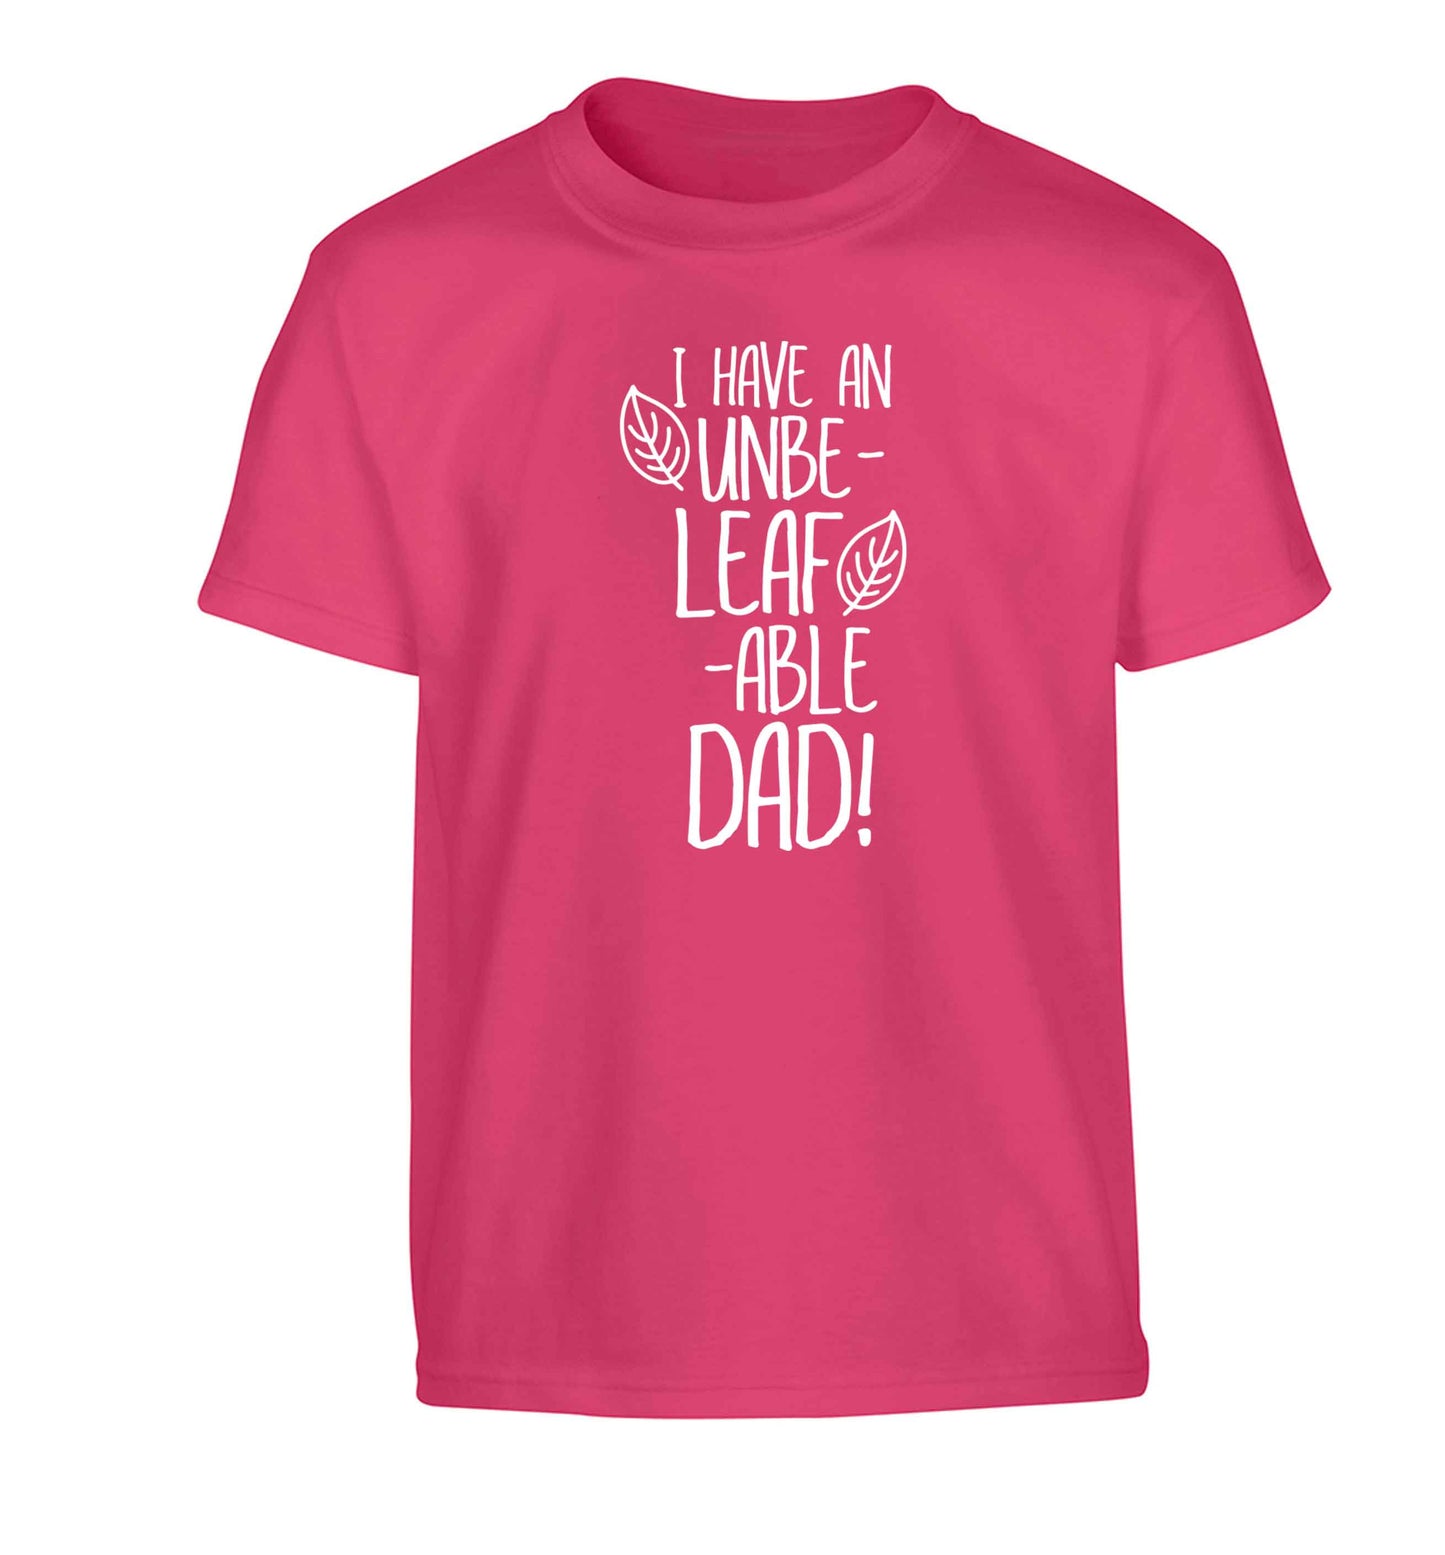 I have an unbe-leaf-able dad Children's pink Tshirt 12-13 Years